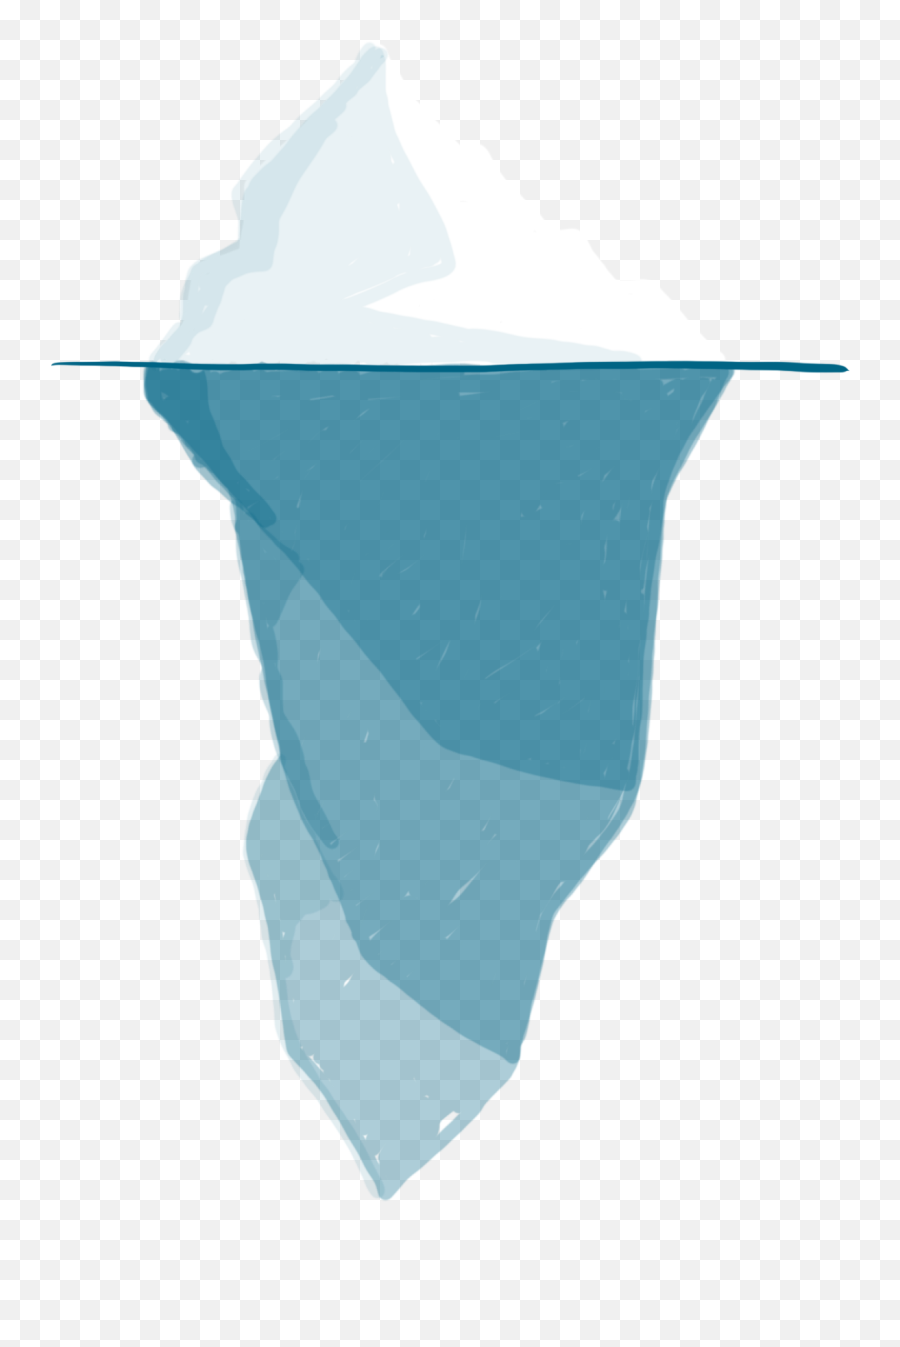 Iceberg Png Picture All - Vertical,Iceberg Icon